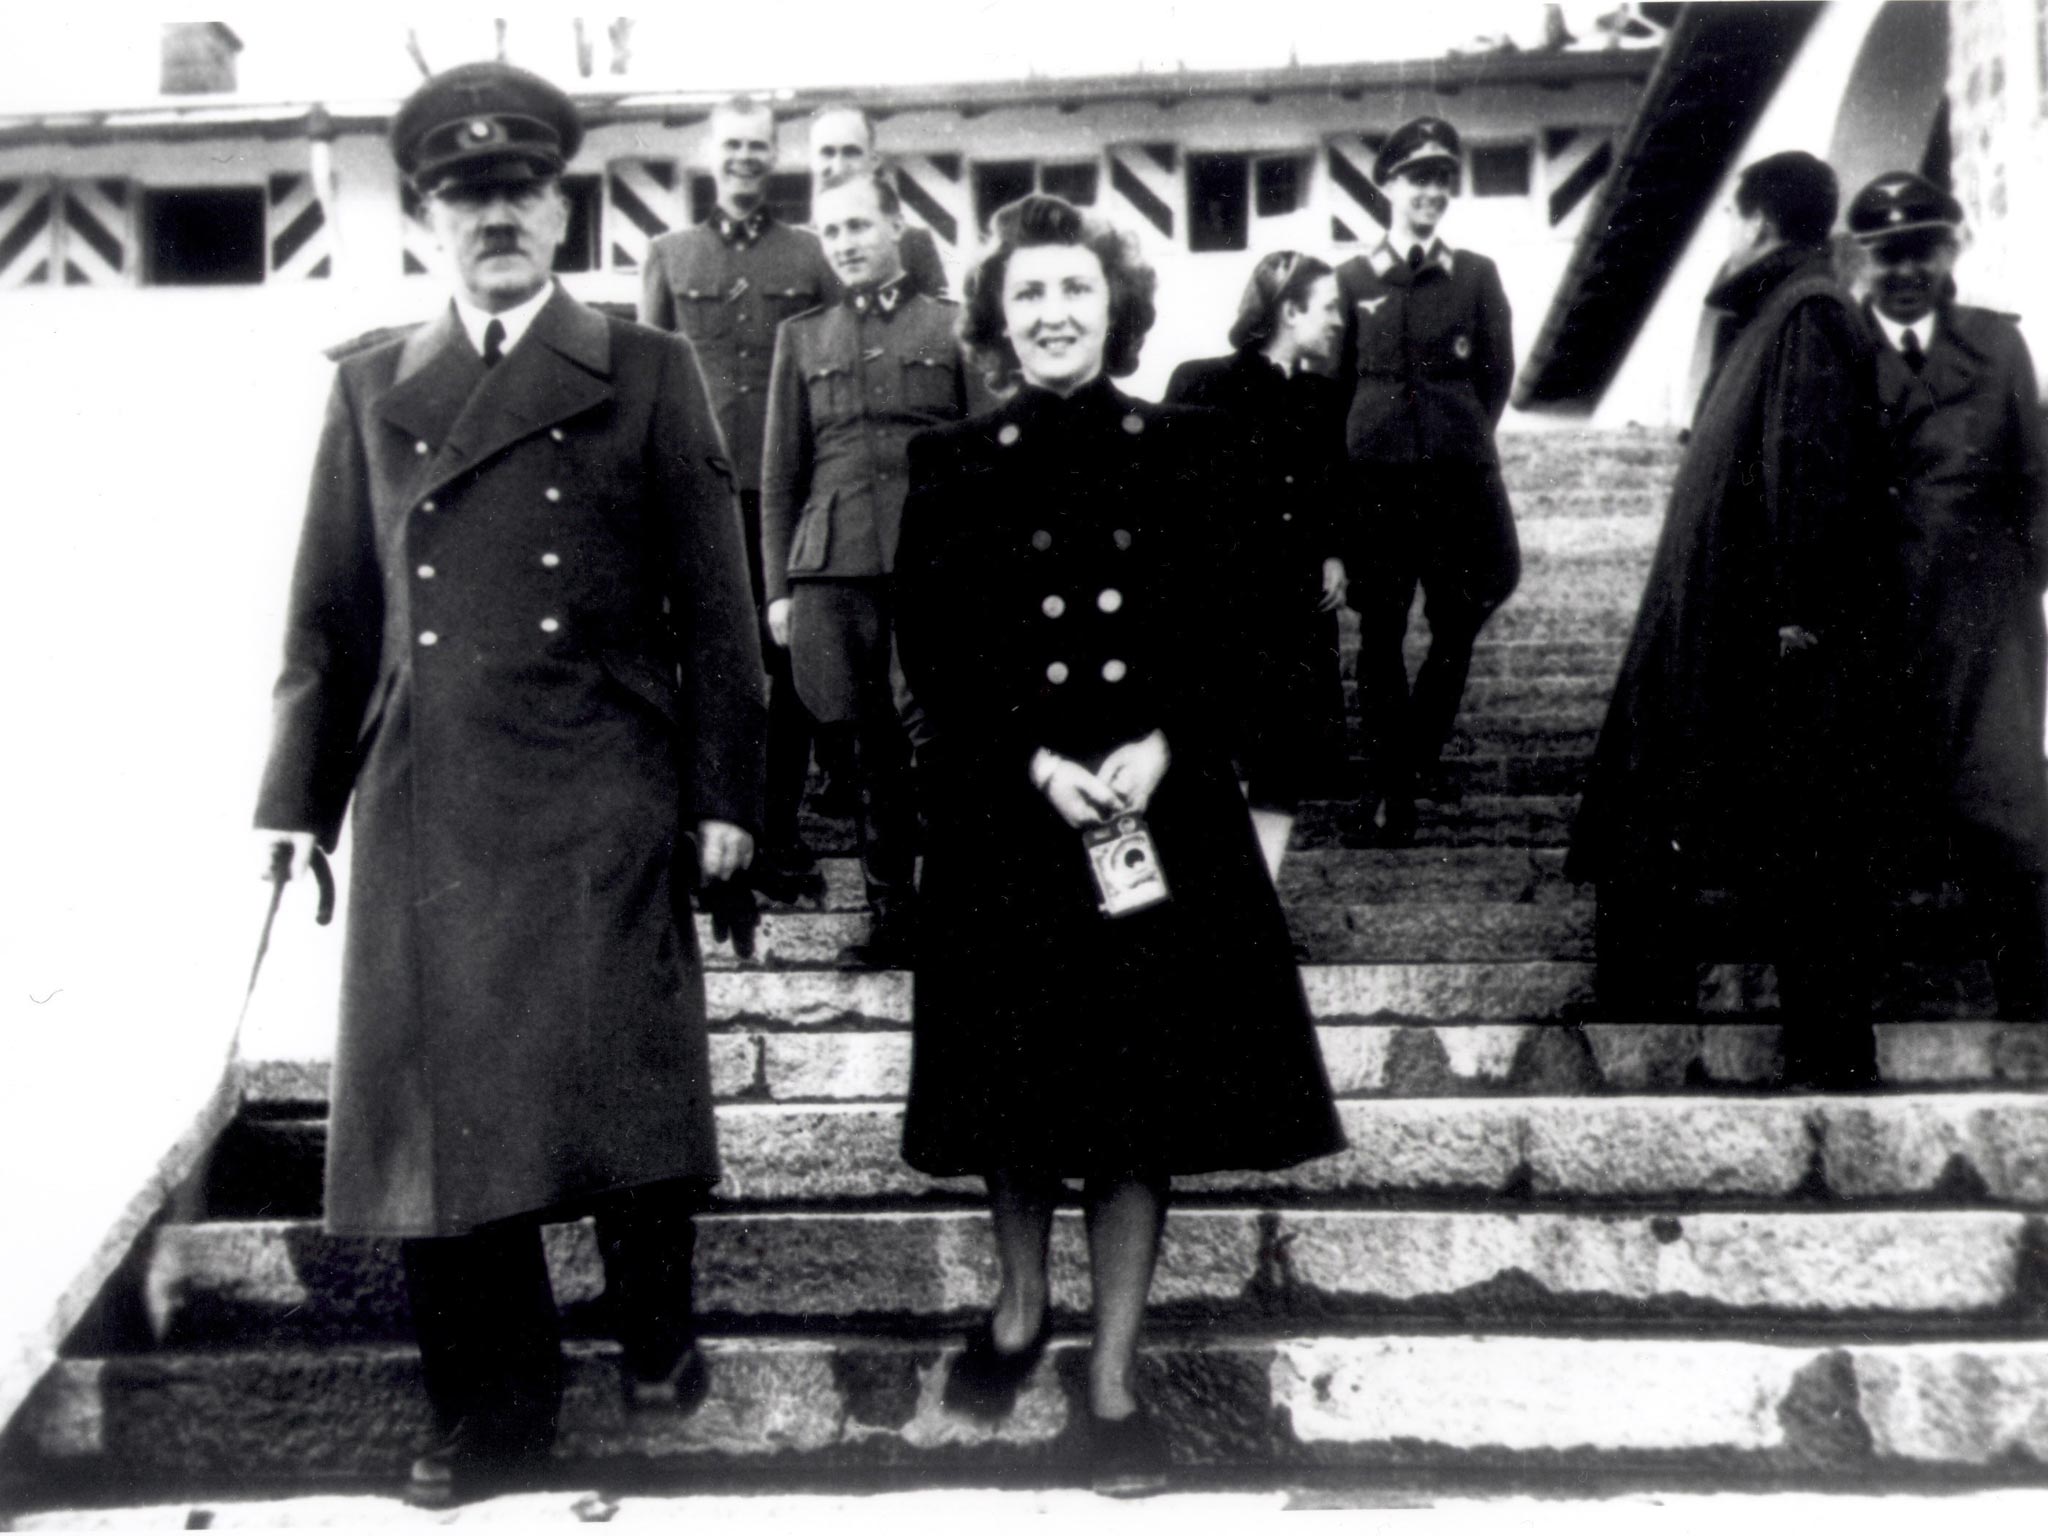 Adolf Hitler with Eva Braun, whose relationship with him was a state secret